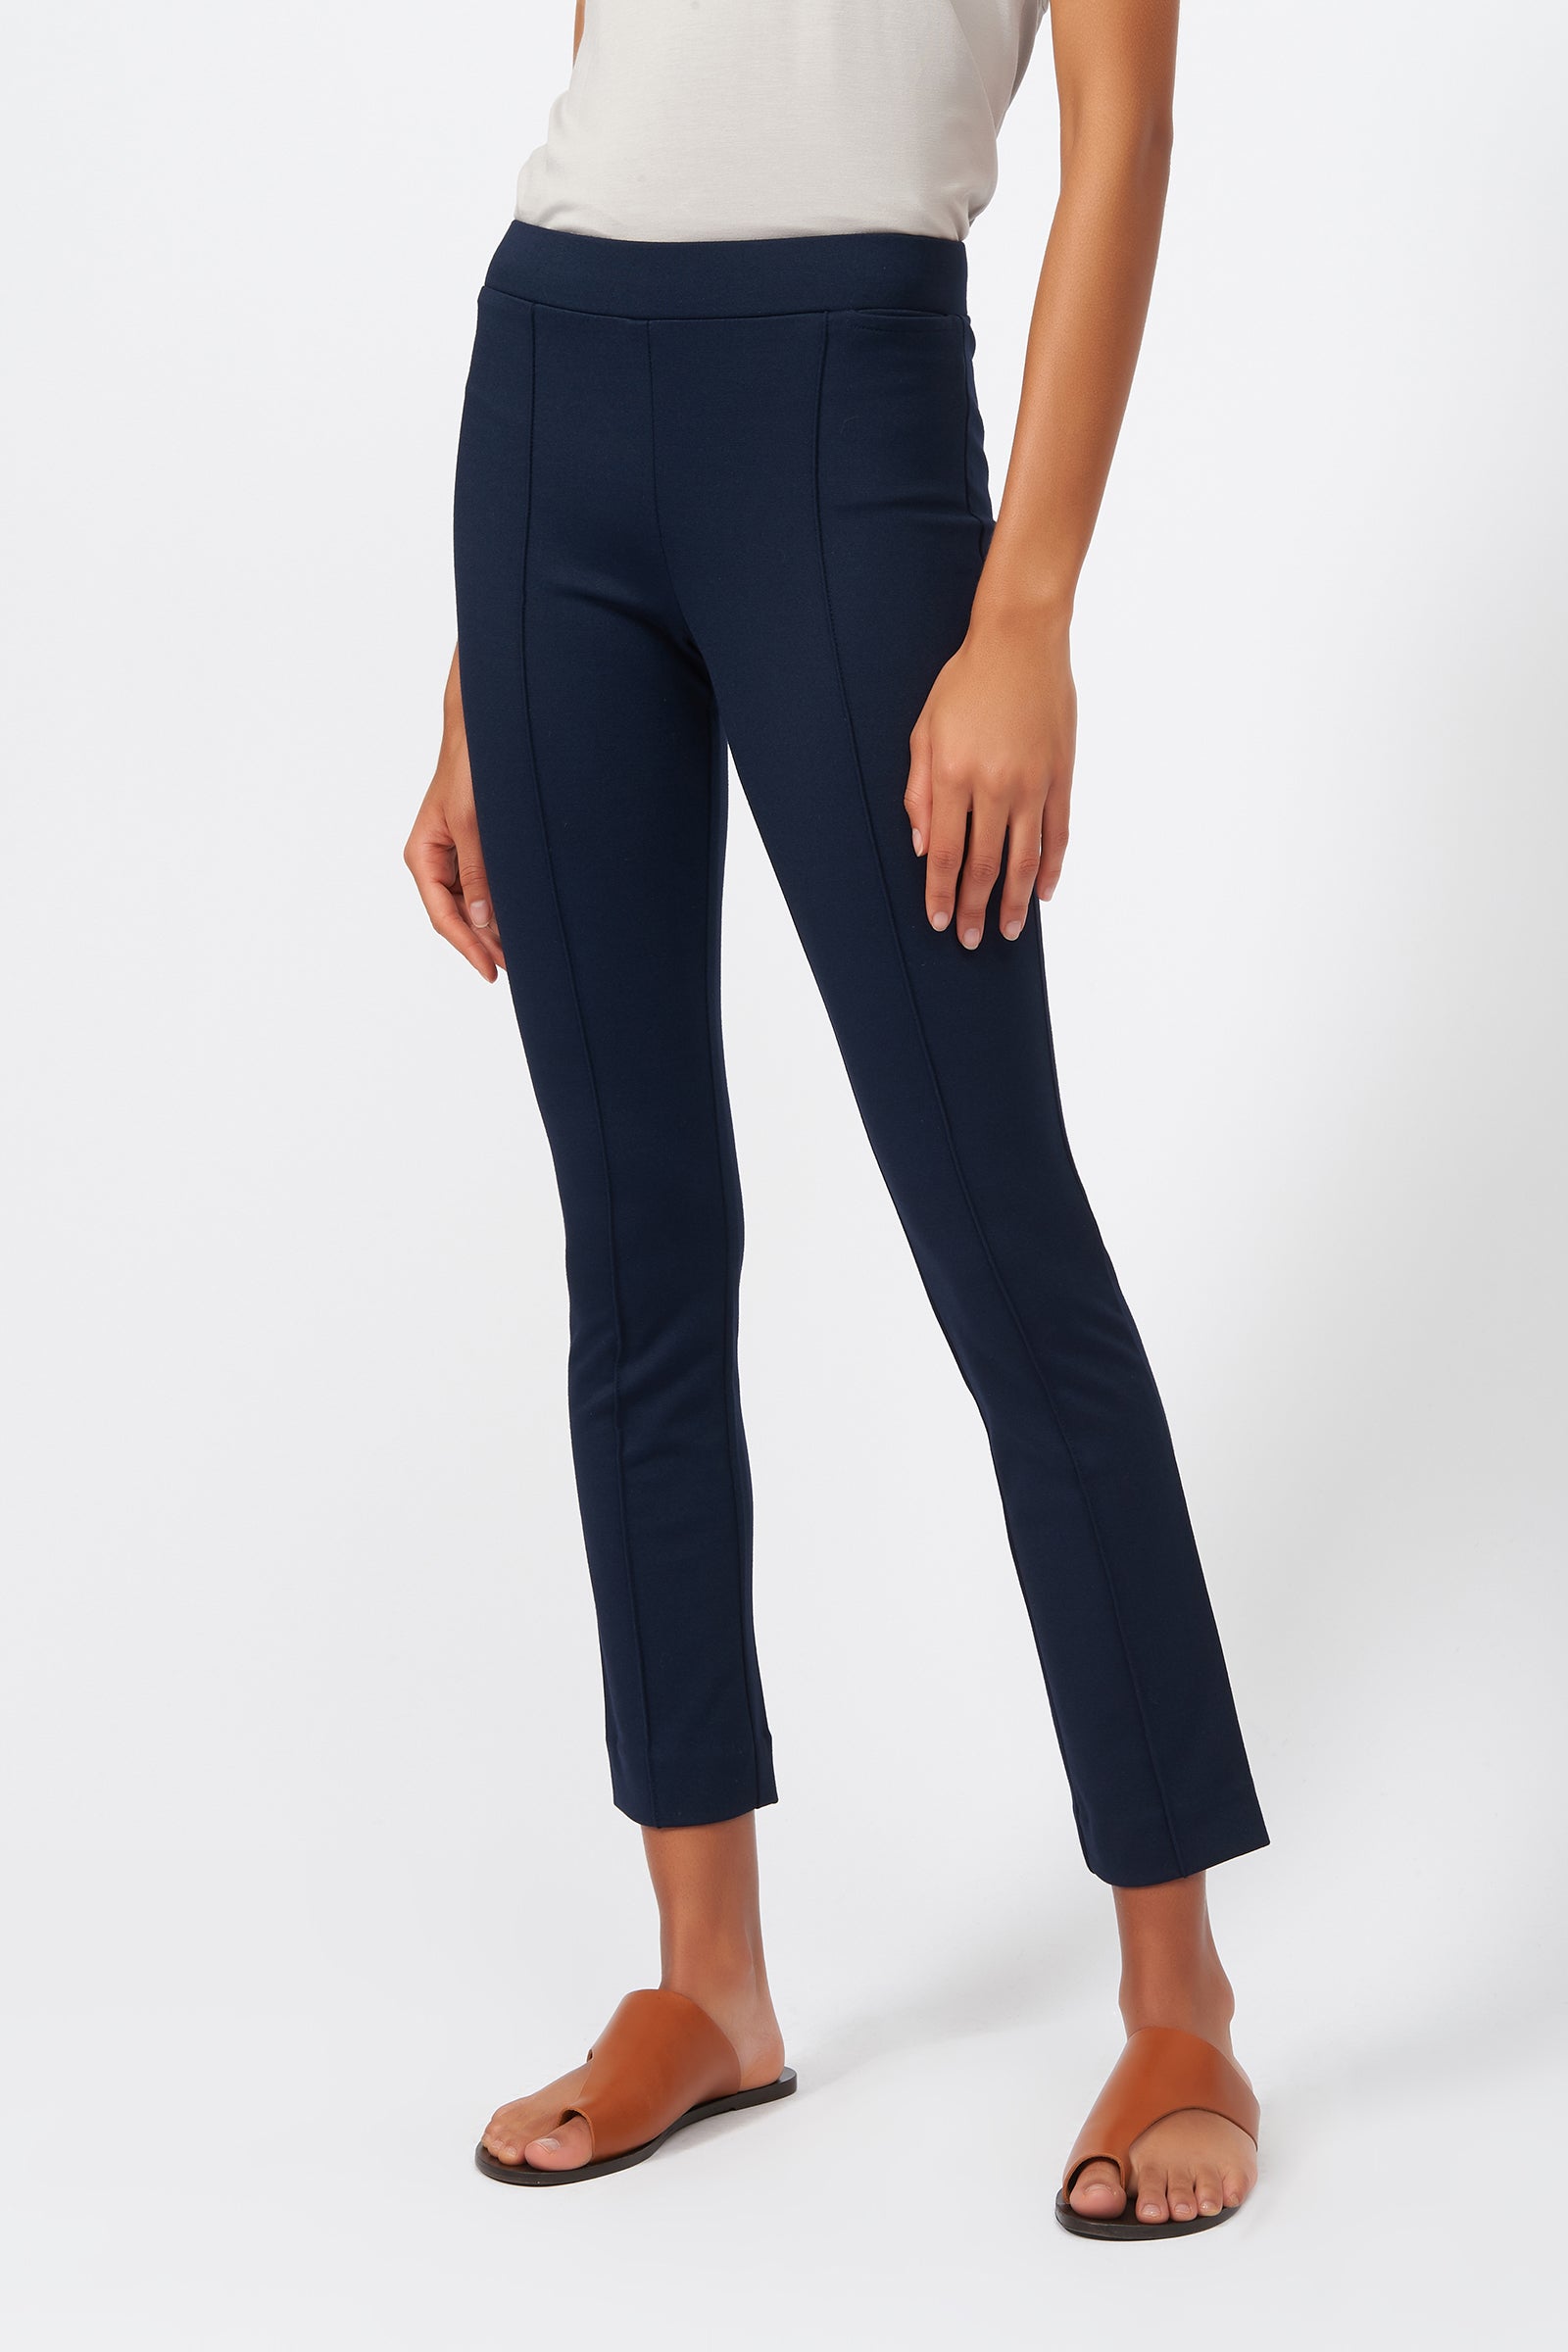 Kal Rieman Pintuck Ponte Ankle Pant in Navy on Model Front View